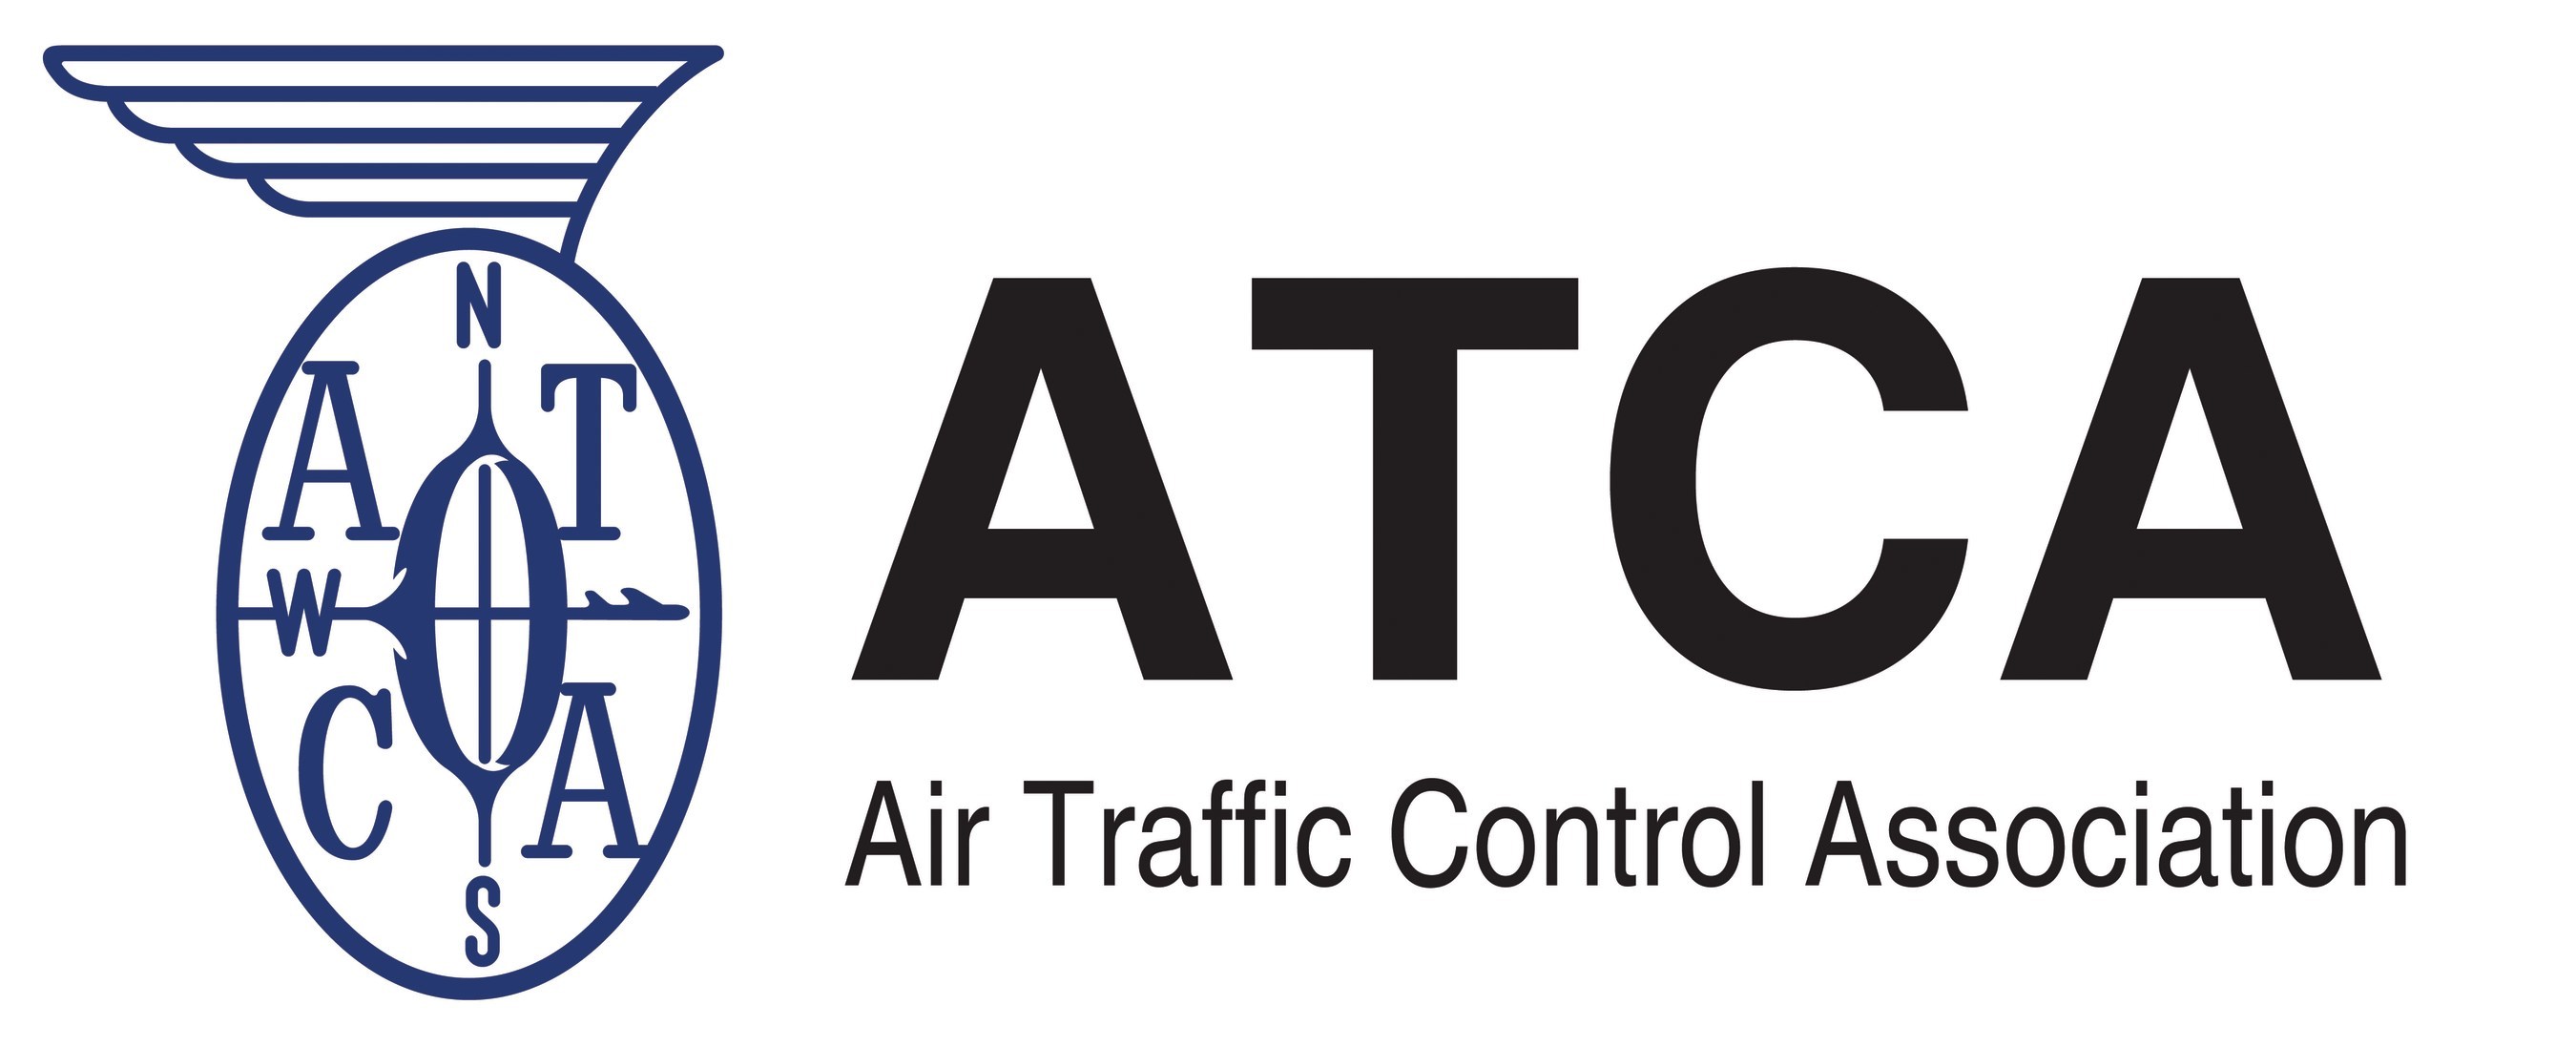 Recognizing Greatness in Air Traffic Management: ATCA Announces 2019 Award Recipients